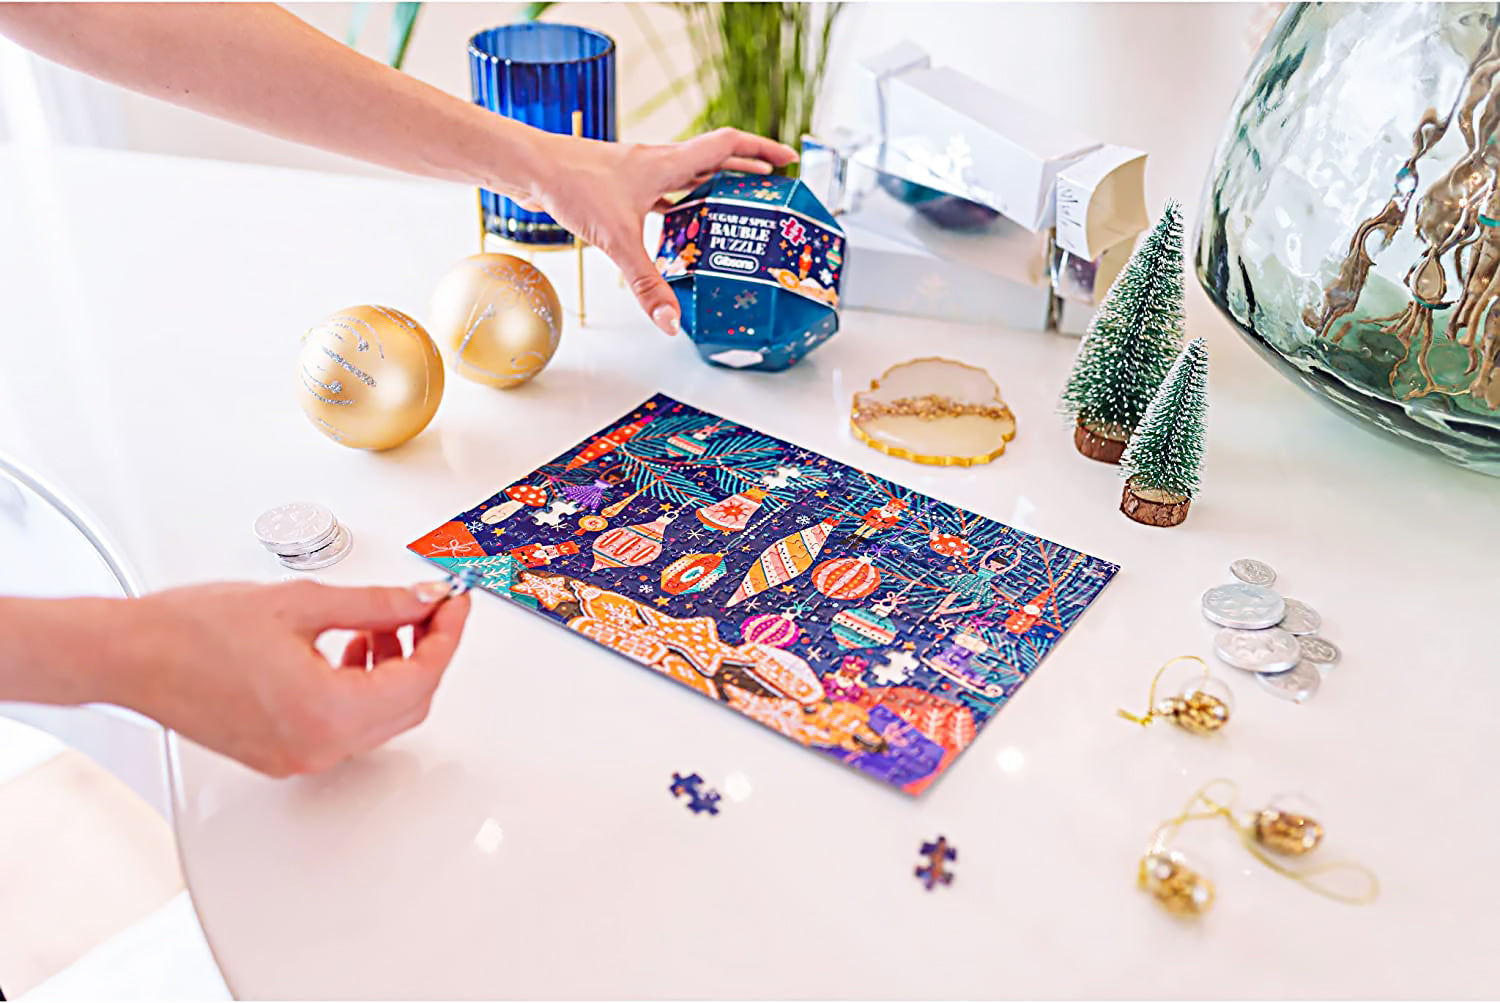 Gibsons Sugar and Spice Puzzle Bauble includes a 200-piece Christmas-themed jigsaw puzzle.